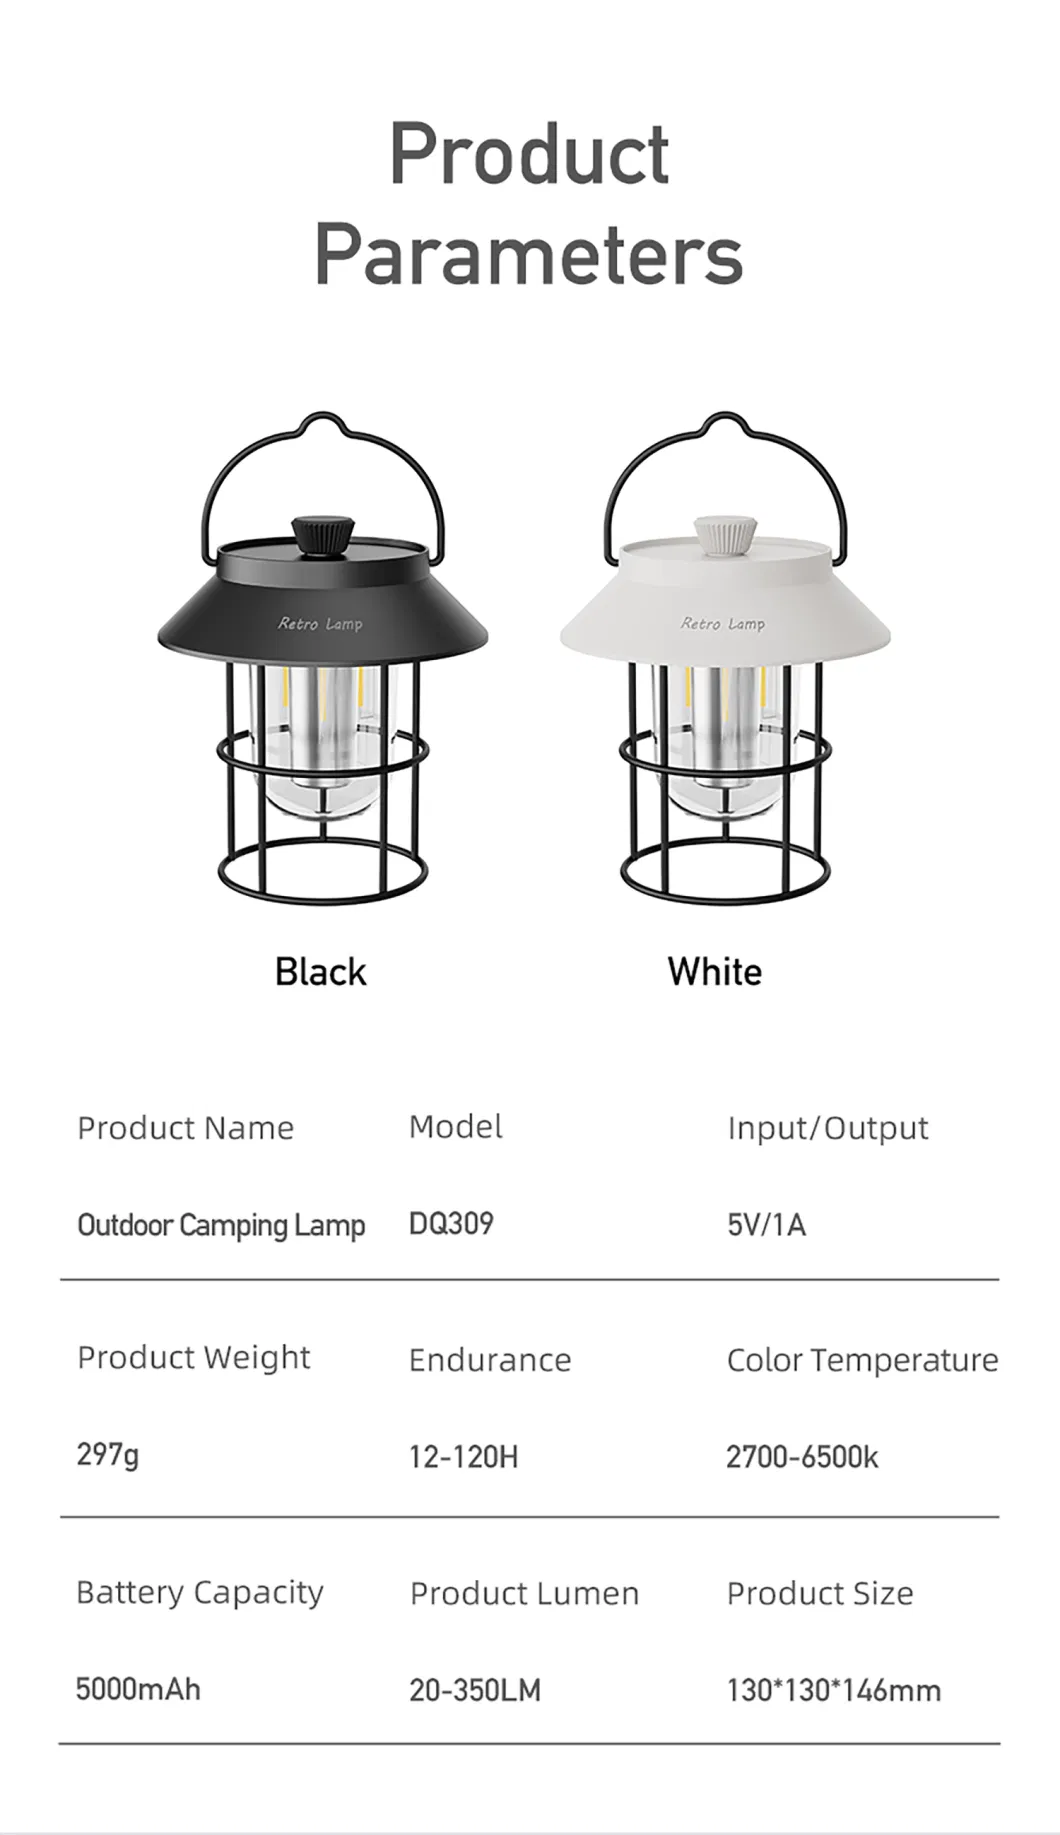 LED Lantern Light Outdoor Camping Lamp Tent Lamp USB Rechargeable Collapsible Emergency Light